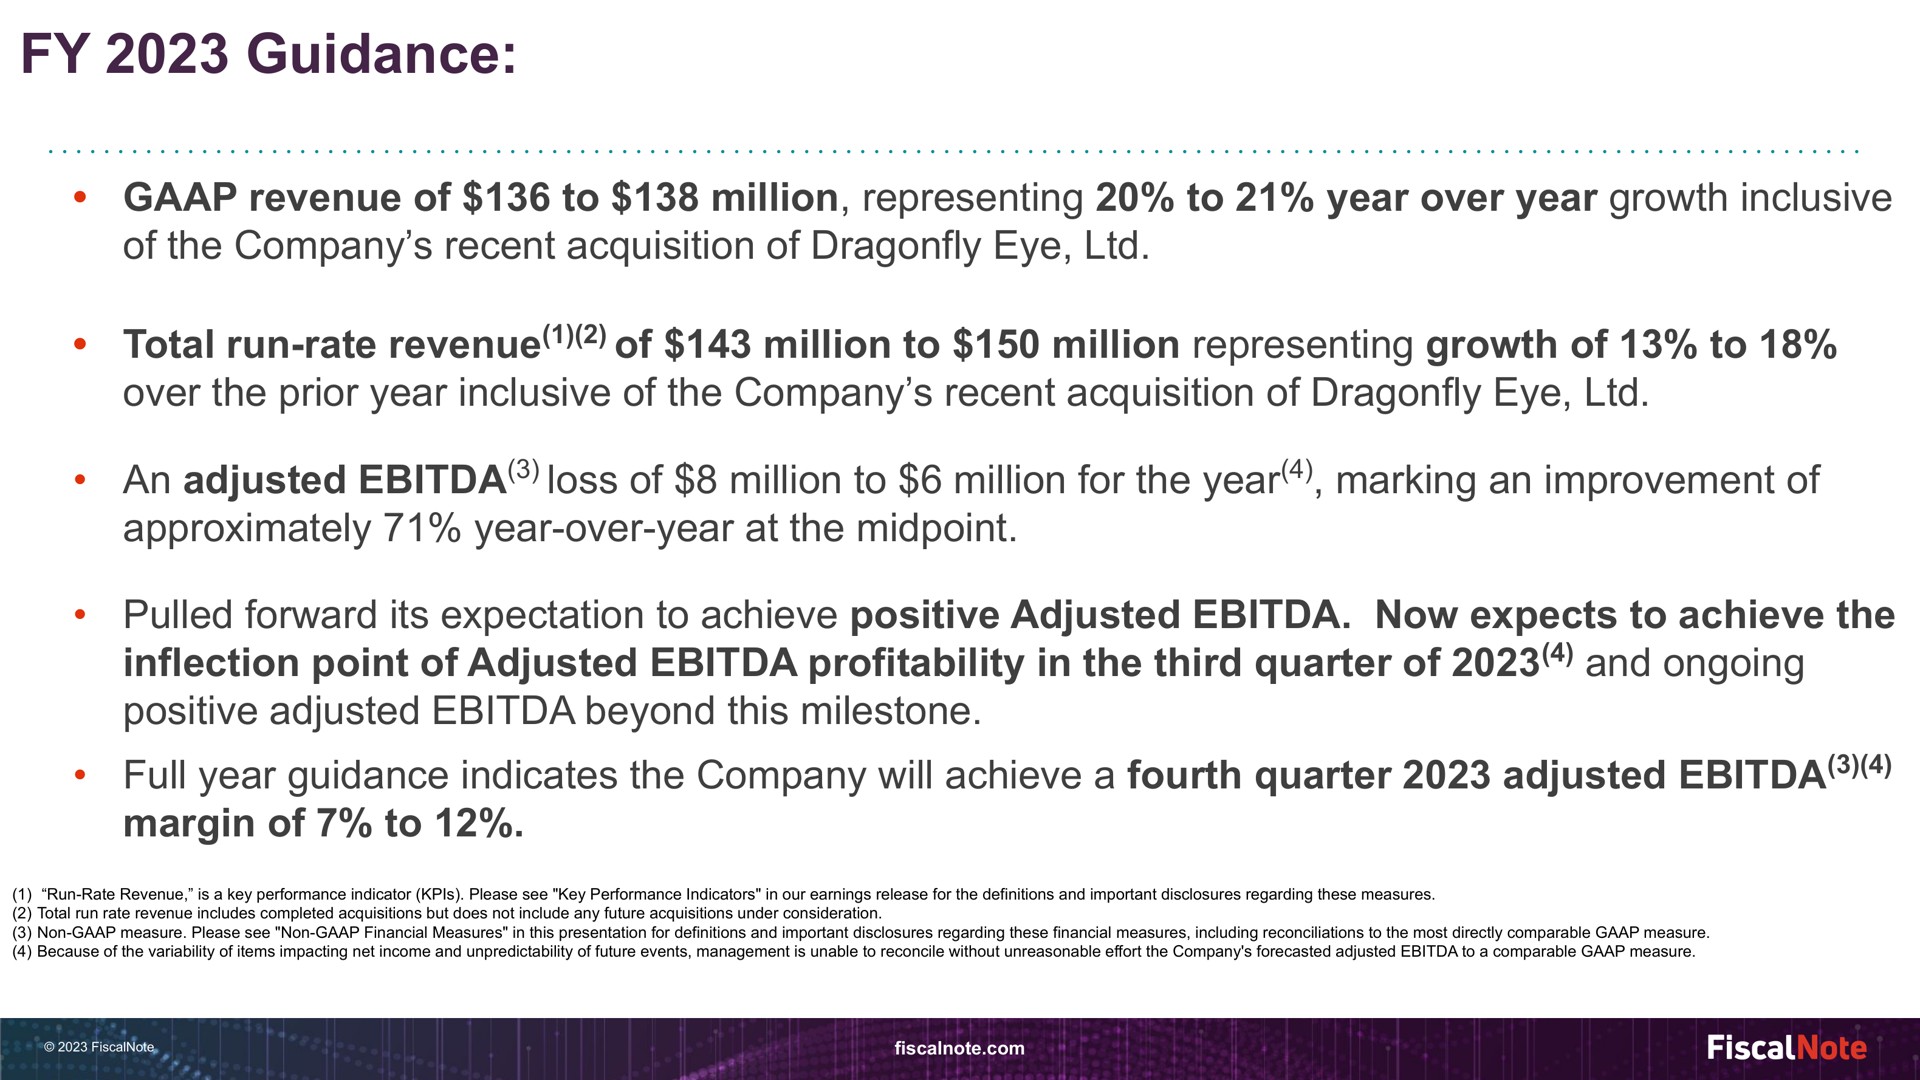 guidance revenue of to million representing to year over year growth inclusive of the company recent acquisition of dragonfly eye total run rate revenue of million to million representing growth of to over the prior year inclusive of the company recent acquisition of dragonfly eye an adjusted loss of million to million for the year marking an improvement of approximately year over year at the pulled forward its expectation to achieve positive adjusted now expects to achieve the inflection point of adjusted profitability in the third quarter of and ongoing positive adjusted beyond this milestone full year guidance indicates the company will achieve a fourth quarter adjusted margin of to | FiscalNote